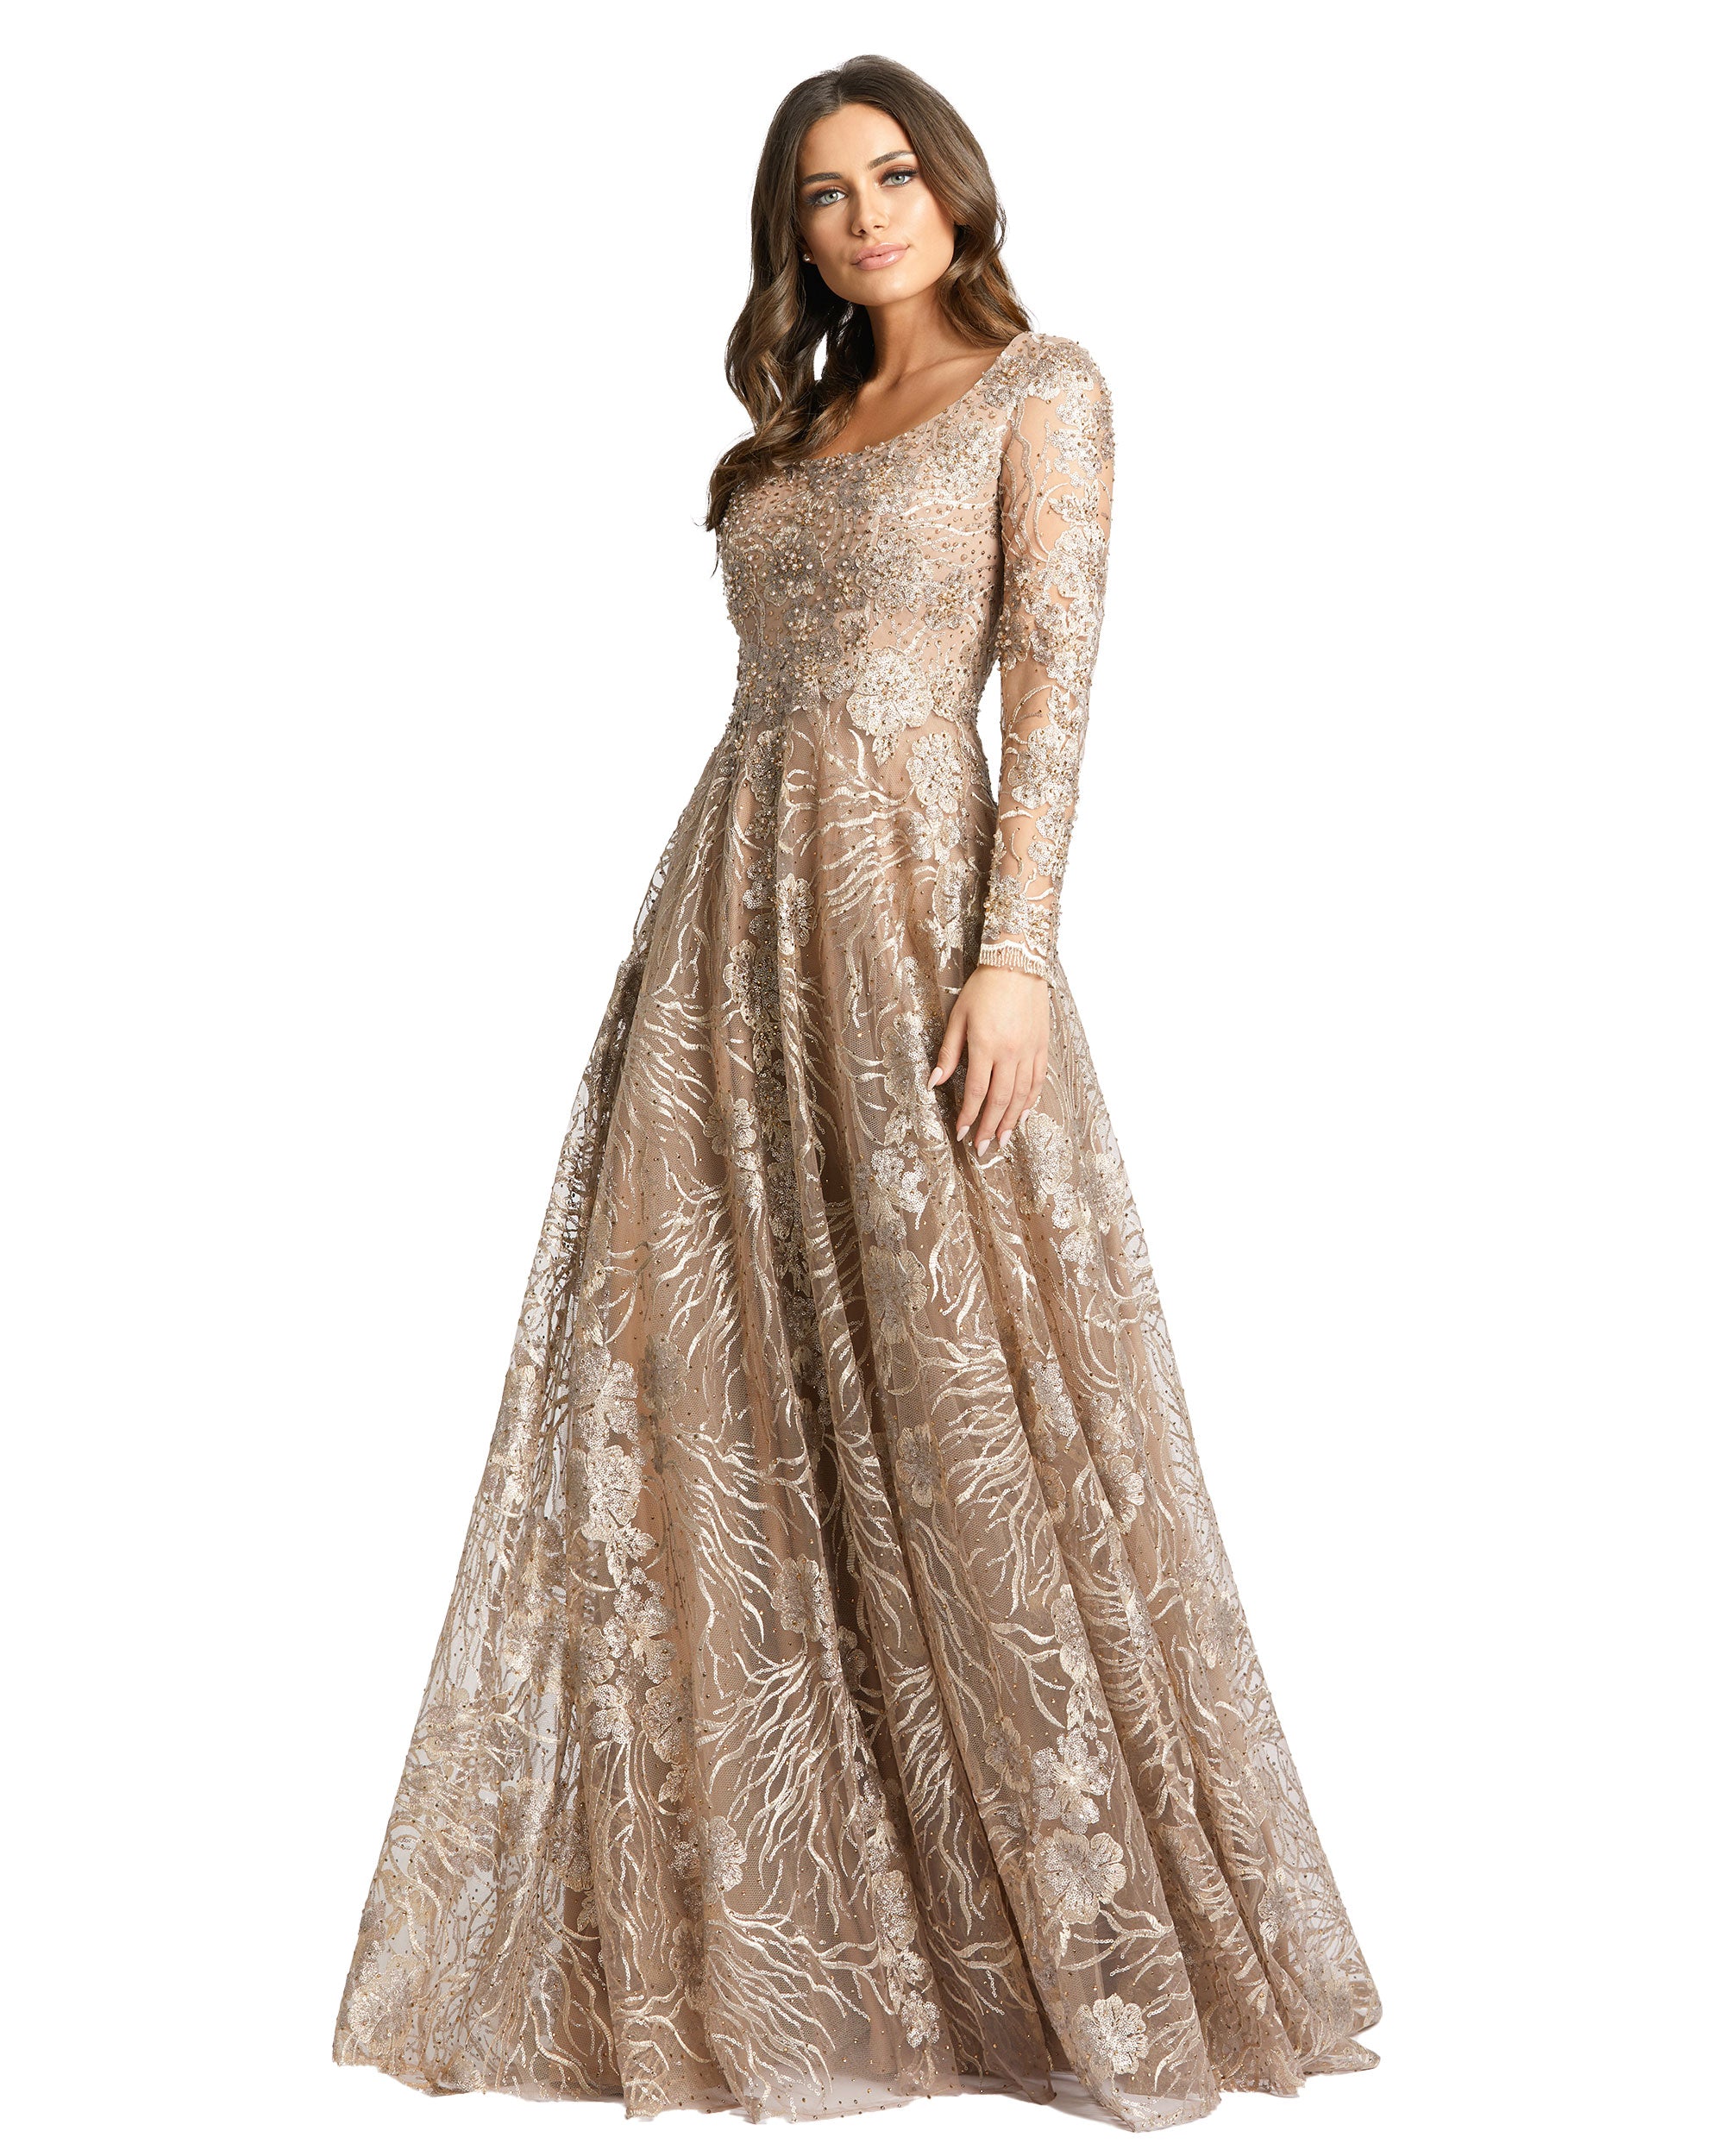 Jewel Encrusted Long Sleeve Square Neck Gown - FINAL SALE